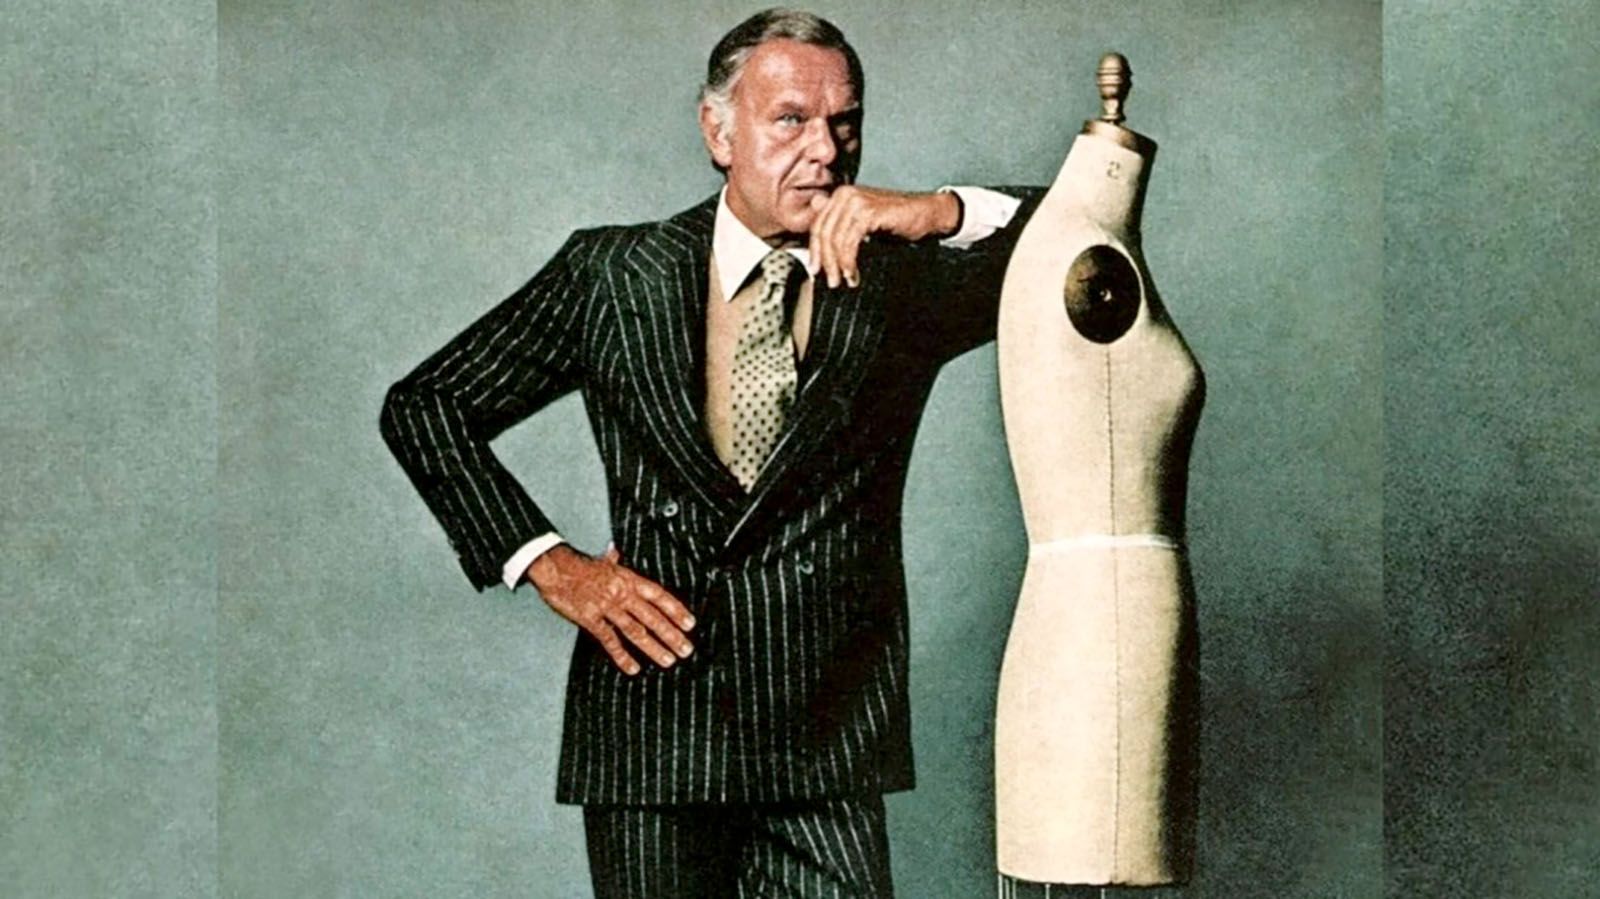 Fort Wayne will continue to honor city native and fashion designer Bill Blass.